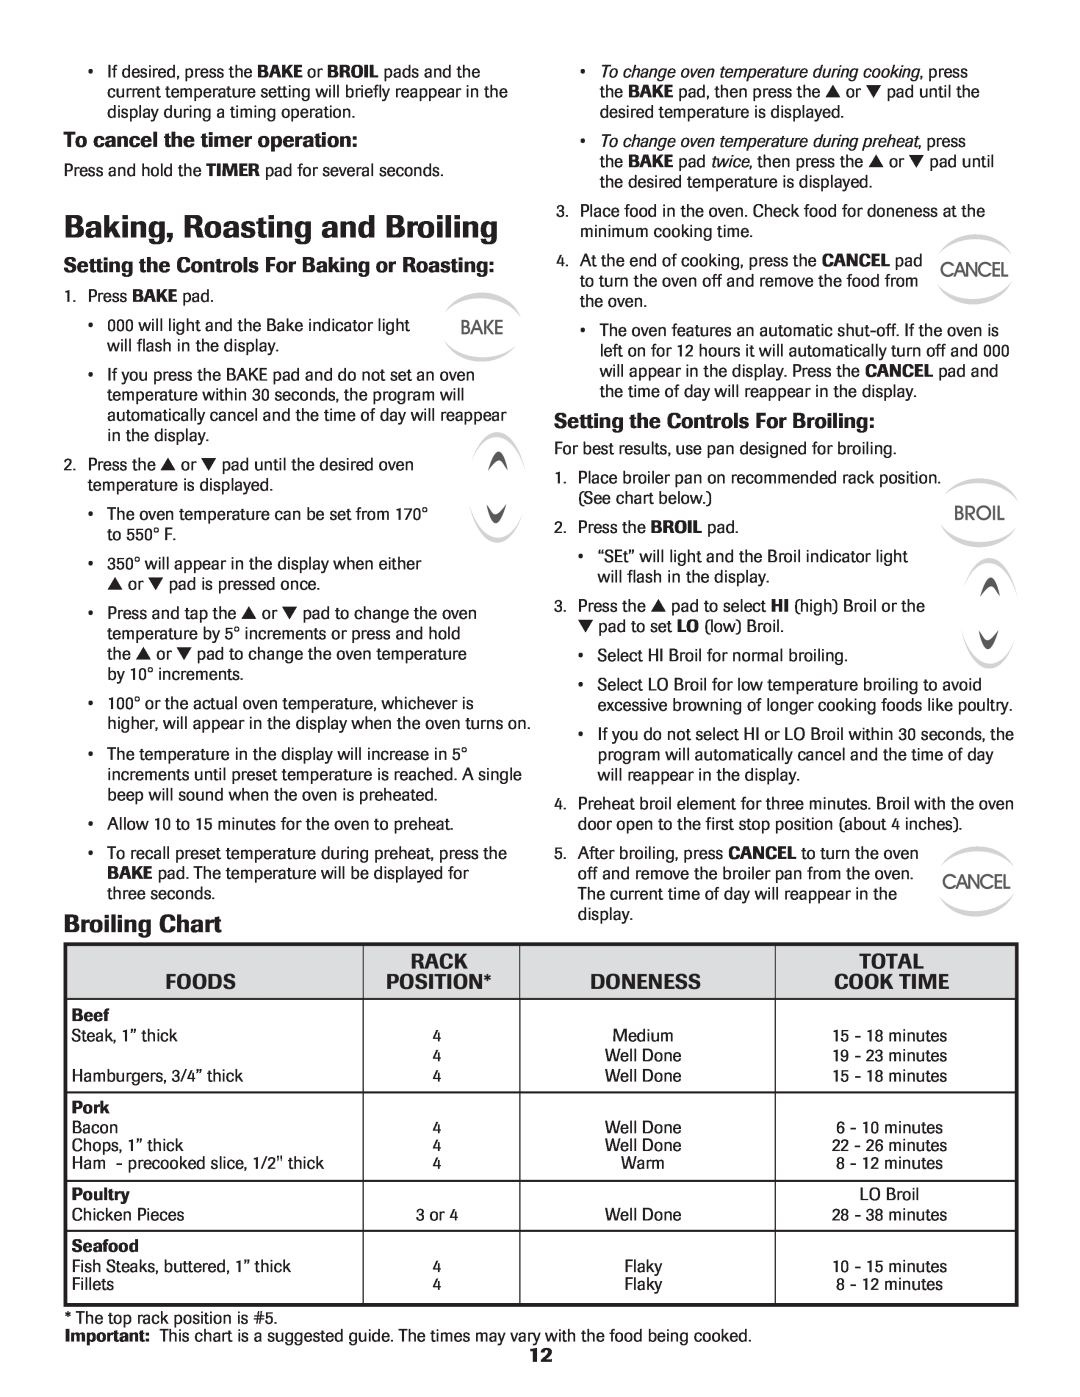 Maytag CER3725AGW Baking, Roasting and Broiling, Broiling Chart, To cancel the timer operation, Rack, Total, Foods 